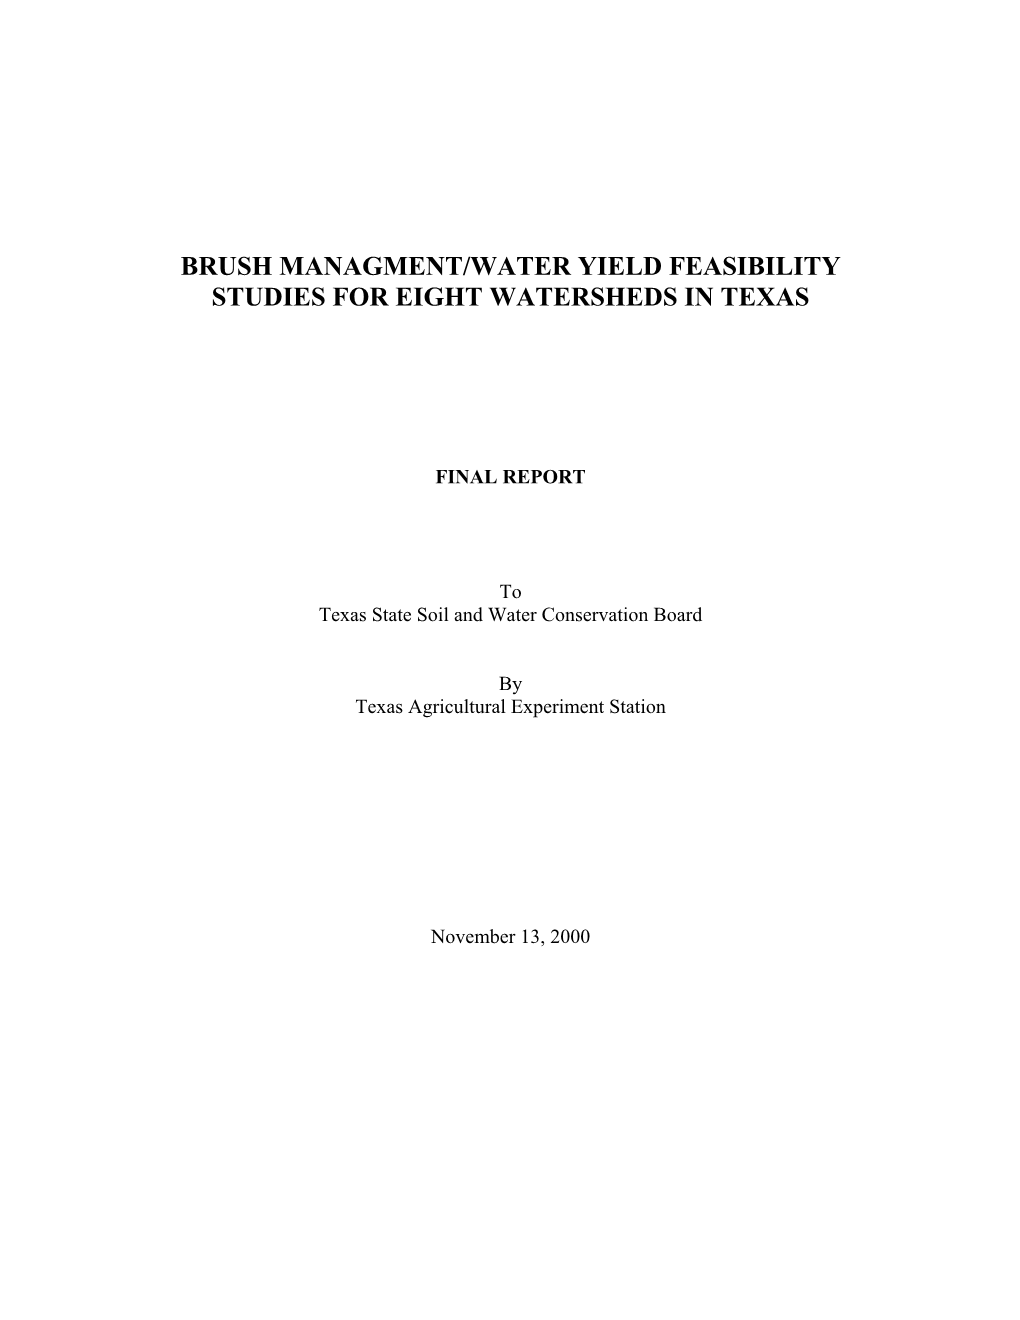 Brush Management/Water Yield Feasibility Studies for Eight